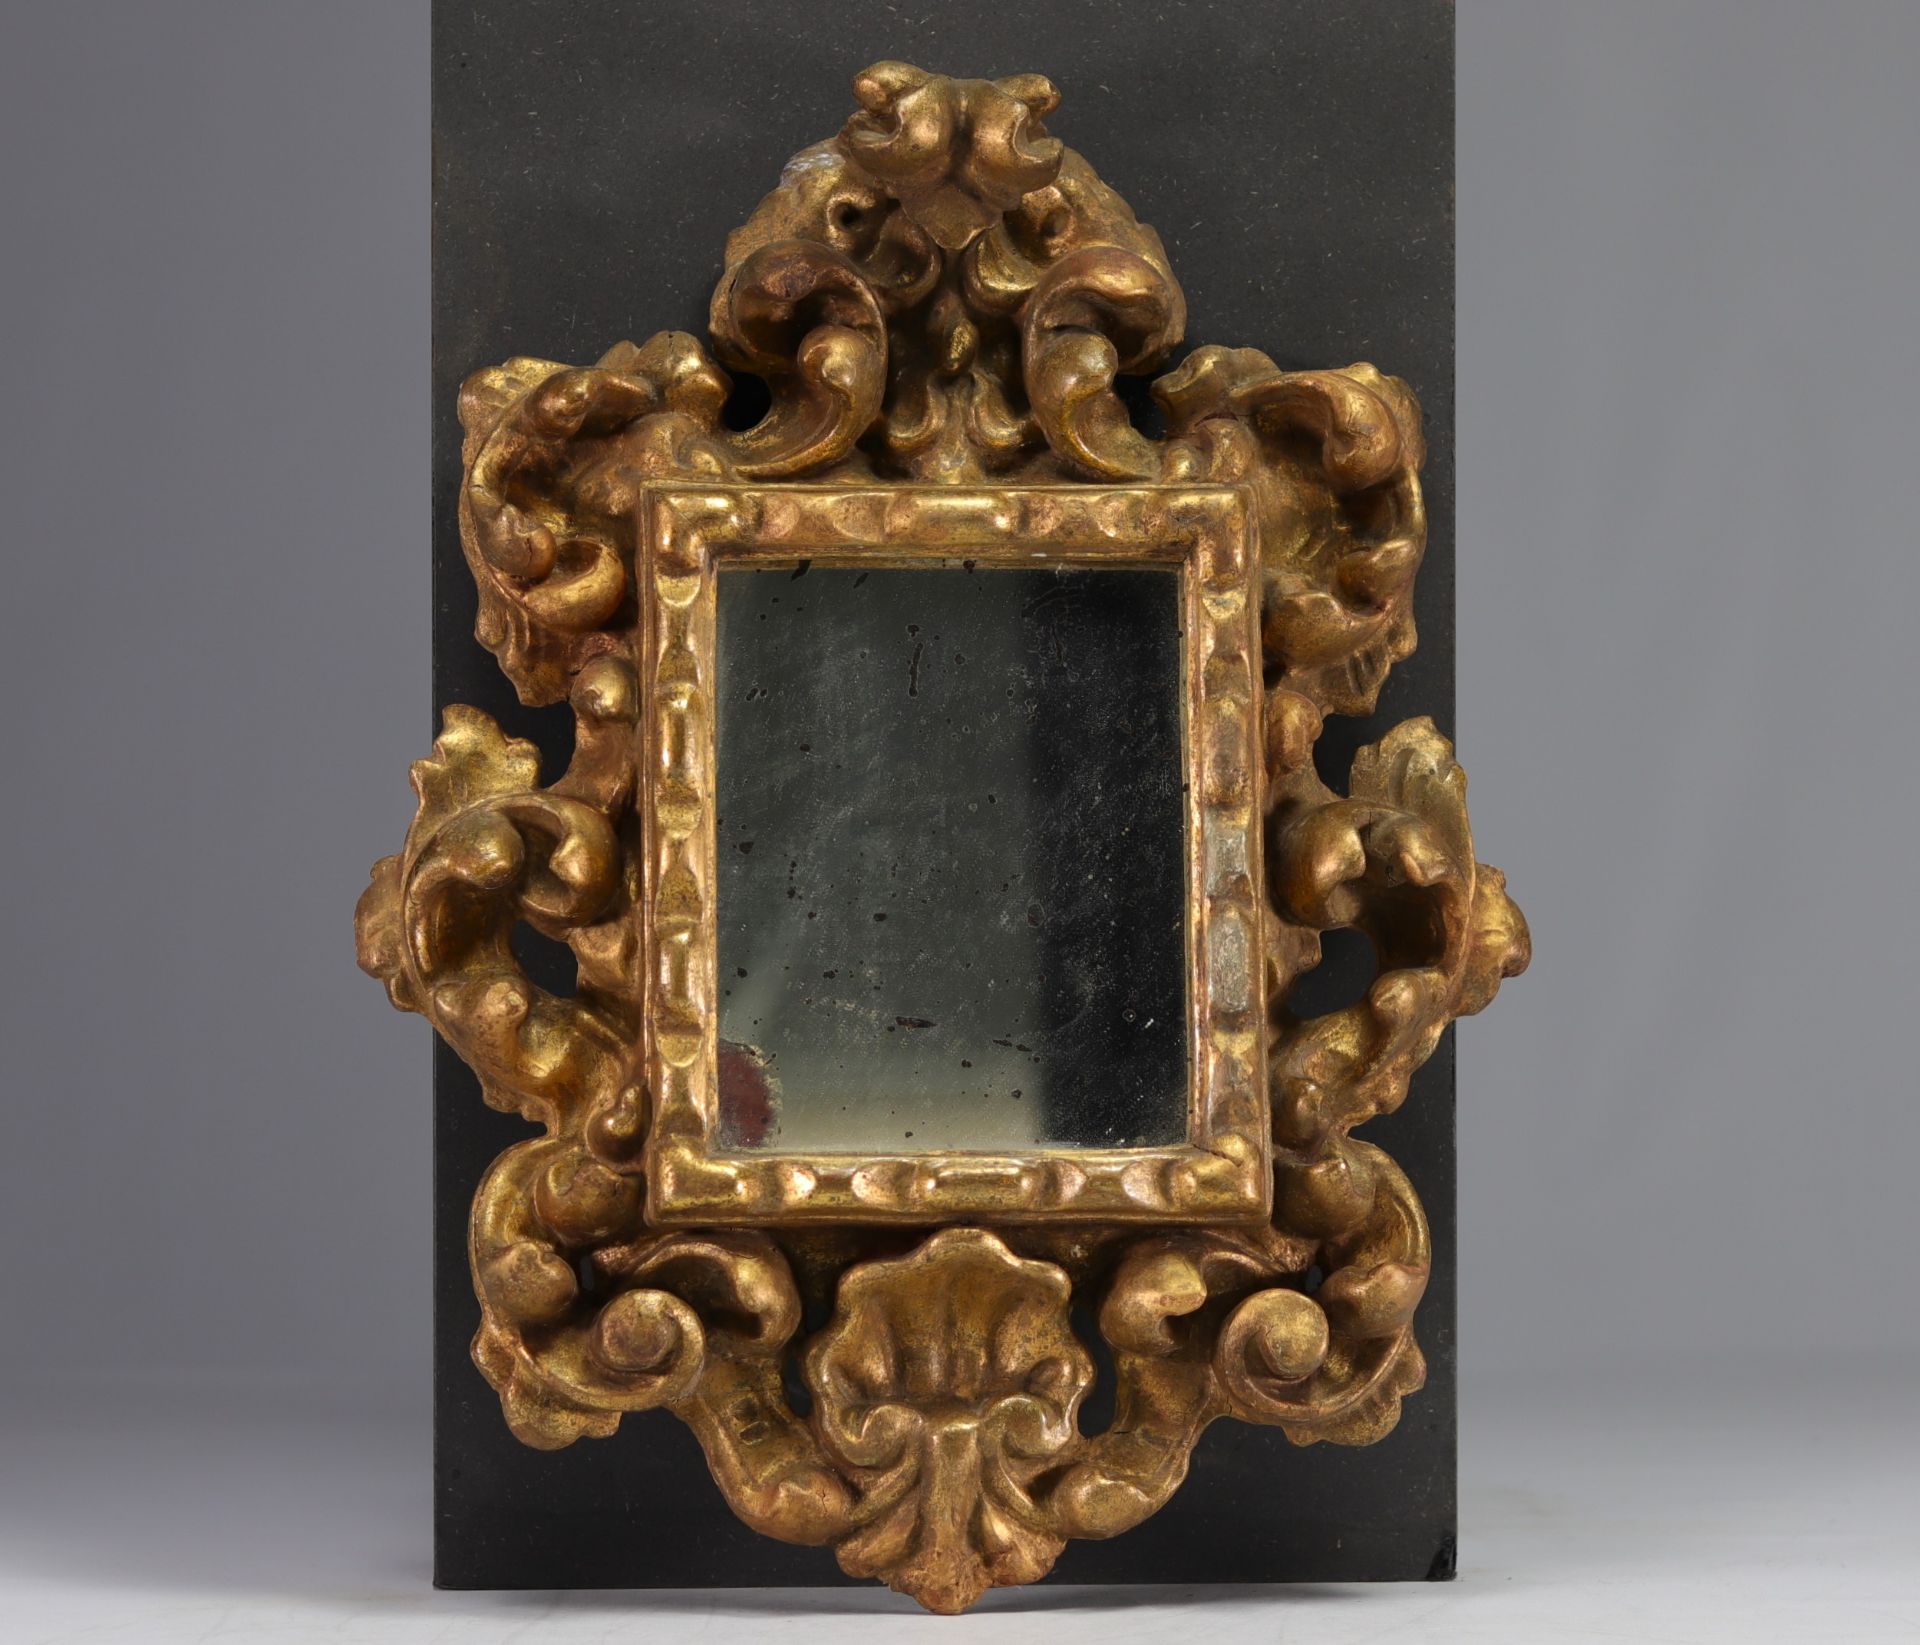 Gilded carved wood mirror decorated with shells and palmettes.